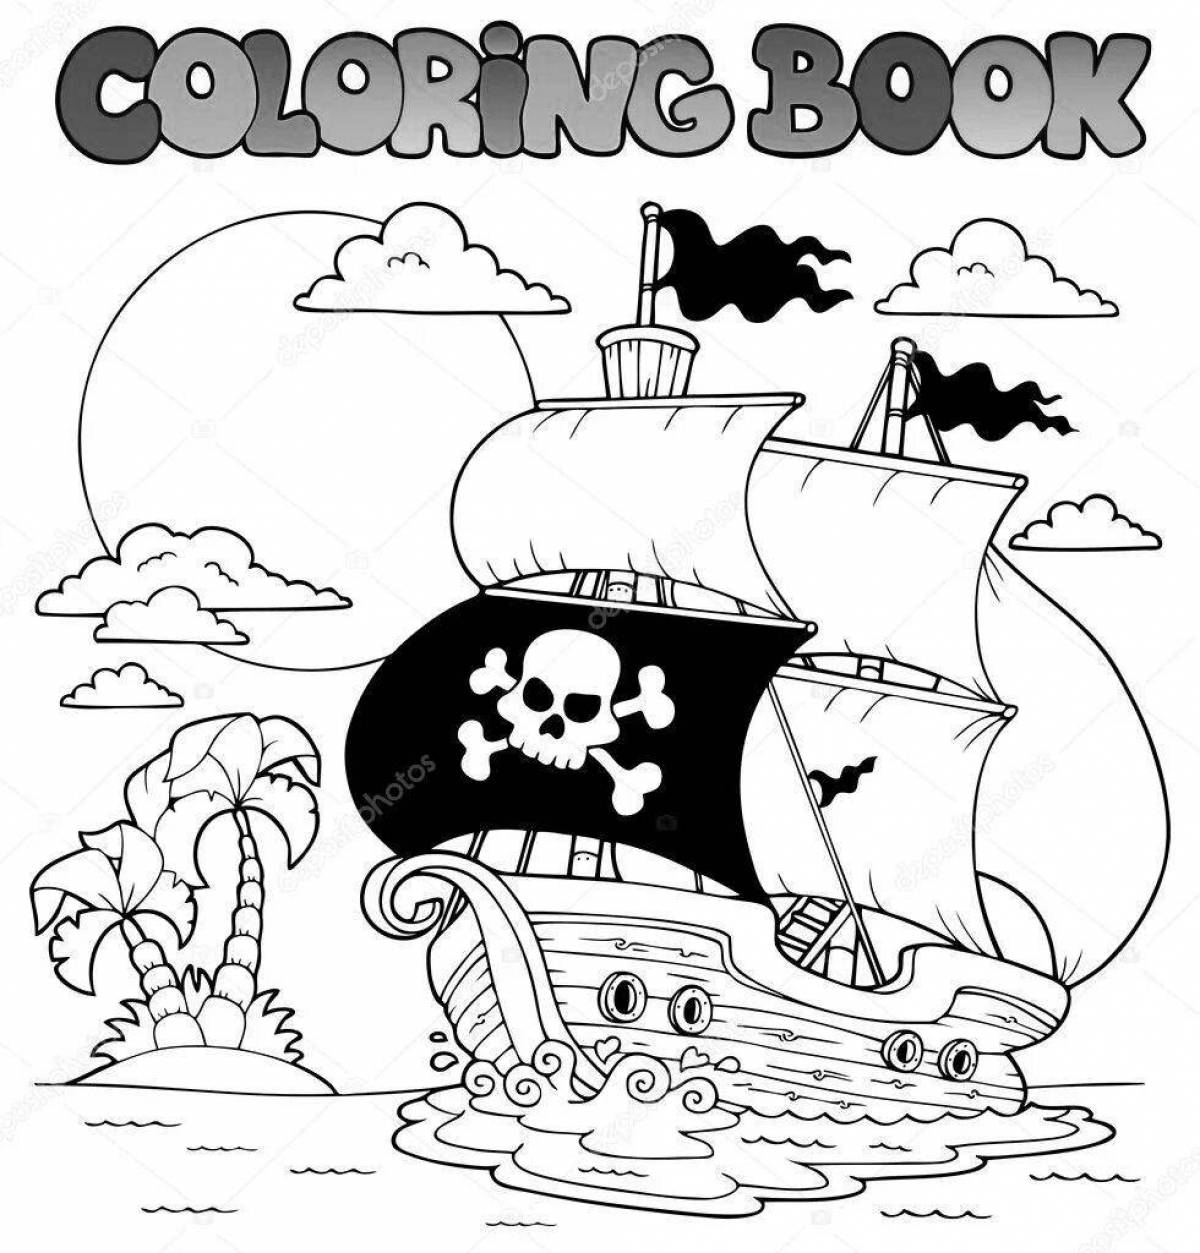 Fancy coloring of a pirate ship for kids